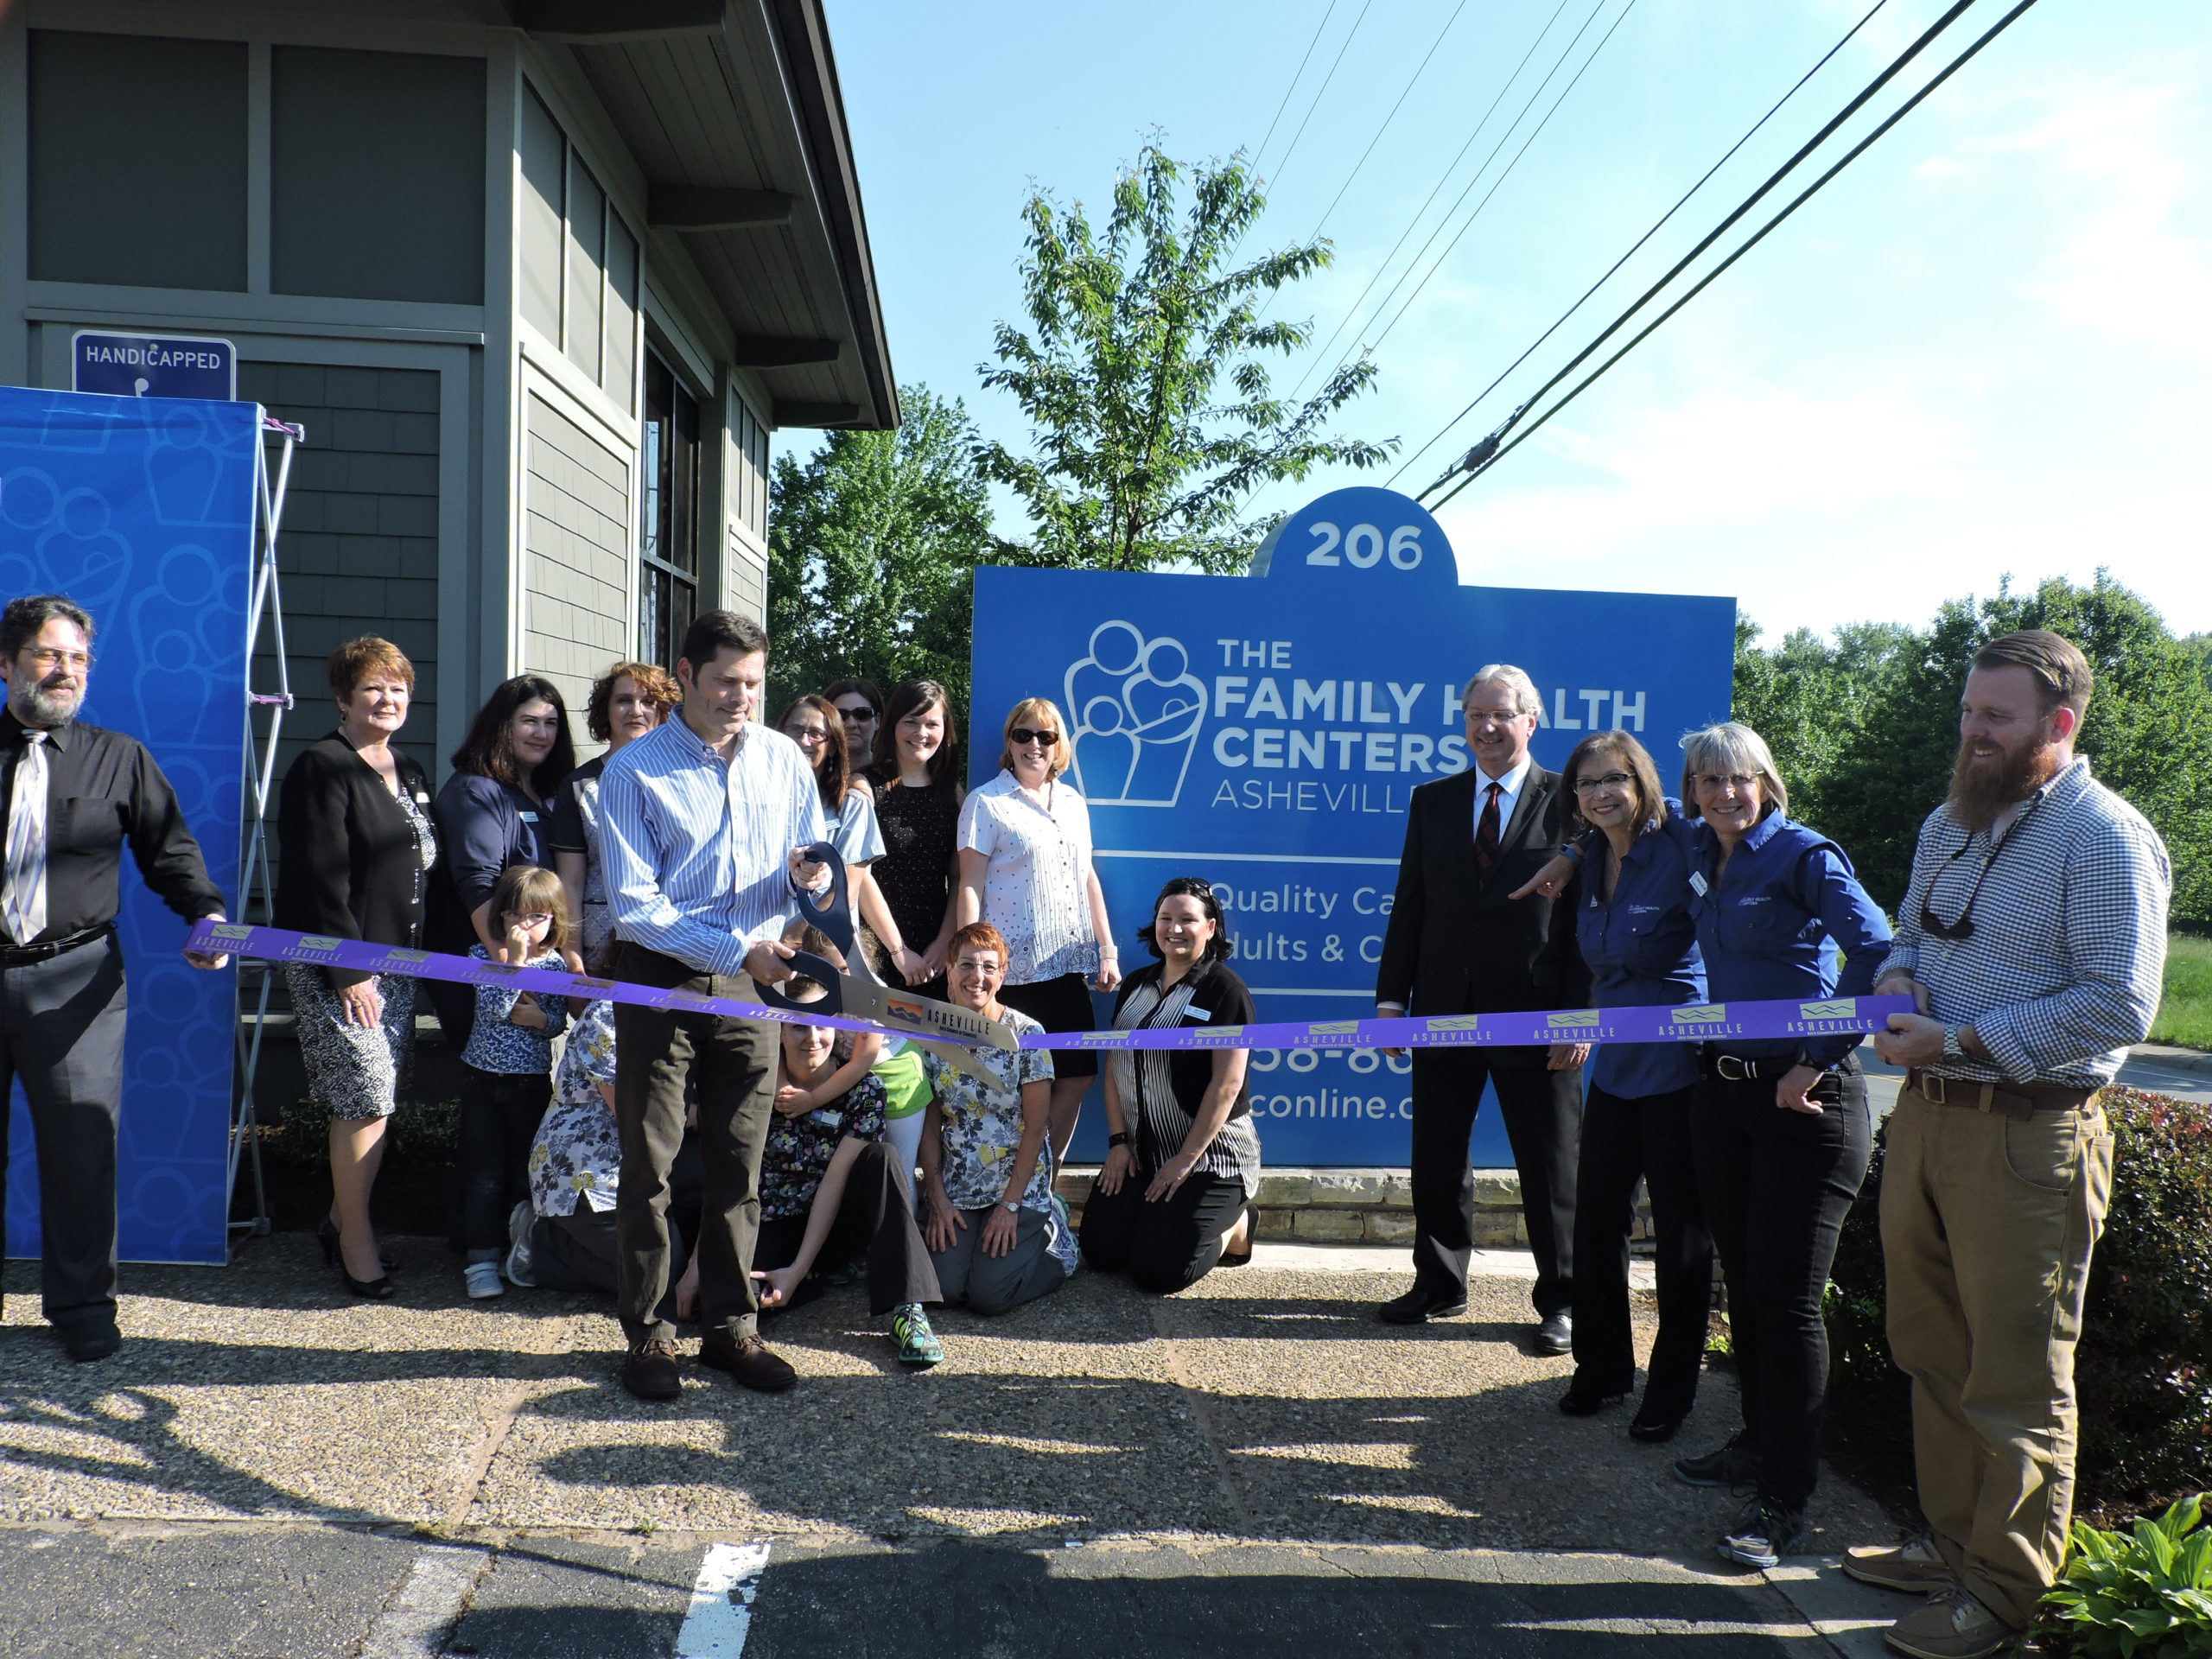 Celebrating our new identity as The Family Health Centers of Asheville, Arden & Hominy Valley